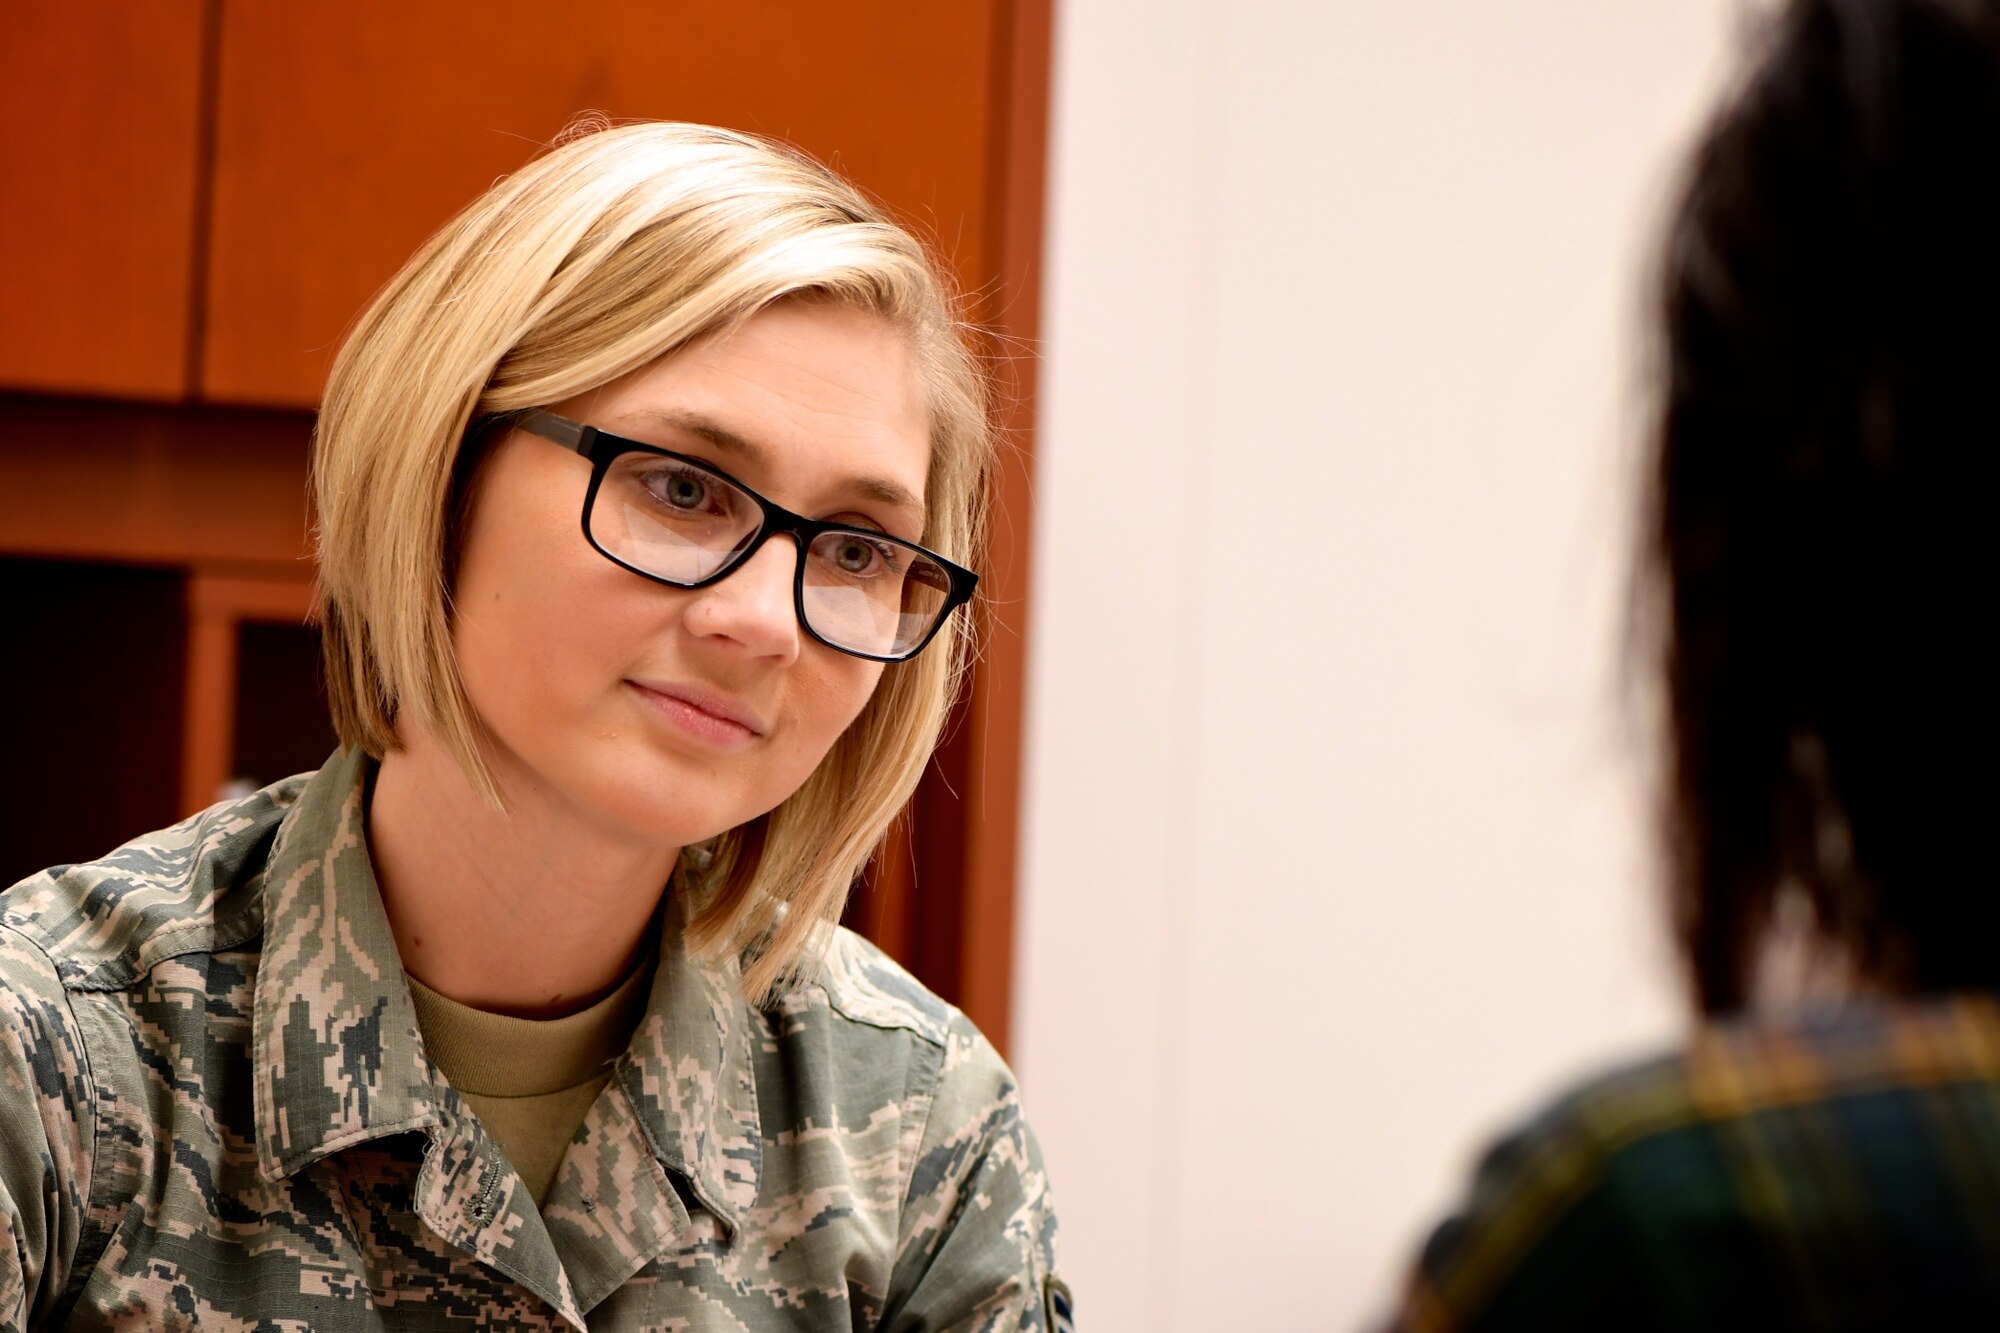 Recruiter Staff Sgt. Jennifer Deimund answers questions from a potential applicant during a college visit at the University of Illinois, on March 21, 2019, near Springfield, Illinois.  Sergeant Deimund met with college counselors and interviewed perspective recruits on what it means to serve in the Air Force Reserve Command.  She and other recruiters are ready to help applicants with their questions.  Those interested in joining the Air Force Reserve Command can call 1-800-257-1212 for more information.  Current members can help that process by recommending friends through the "Get One Now" program by logging on to https://www.get1now.us and register to be eligible for prizes.  (U.S. Air Force photo by Lt. Col. Stan Paregien)